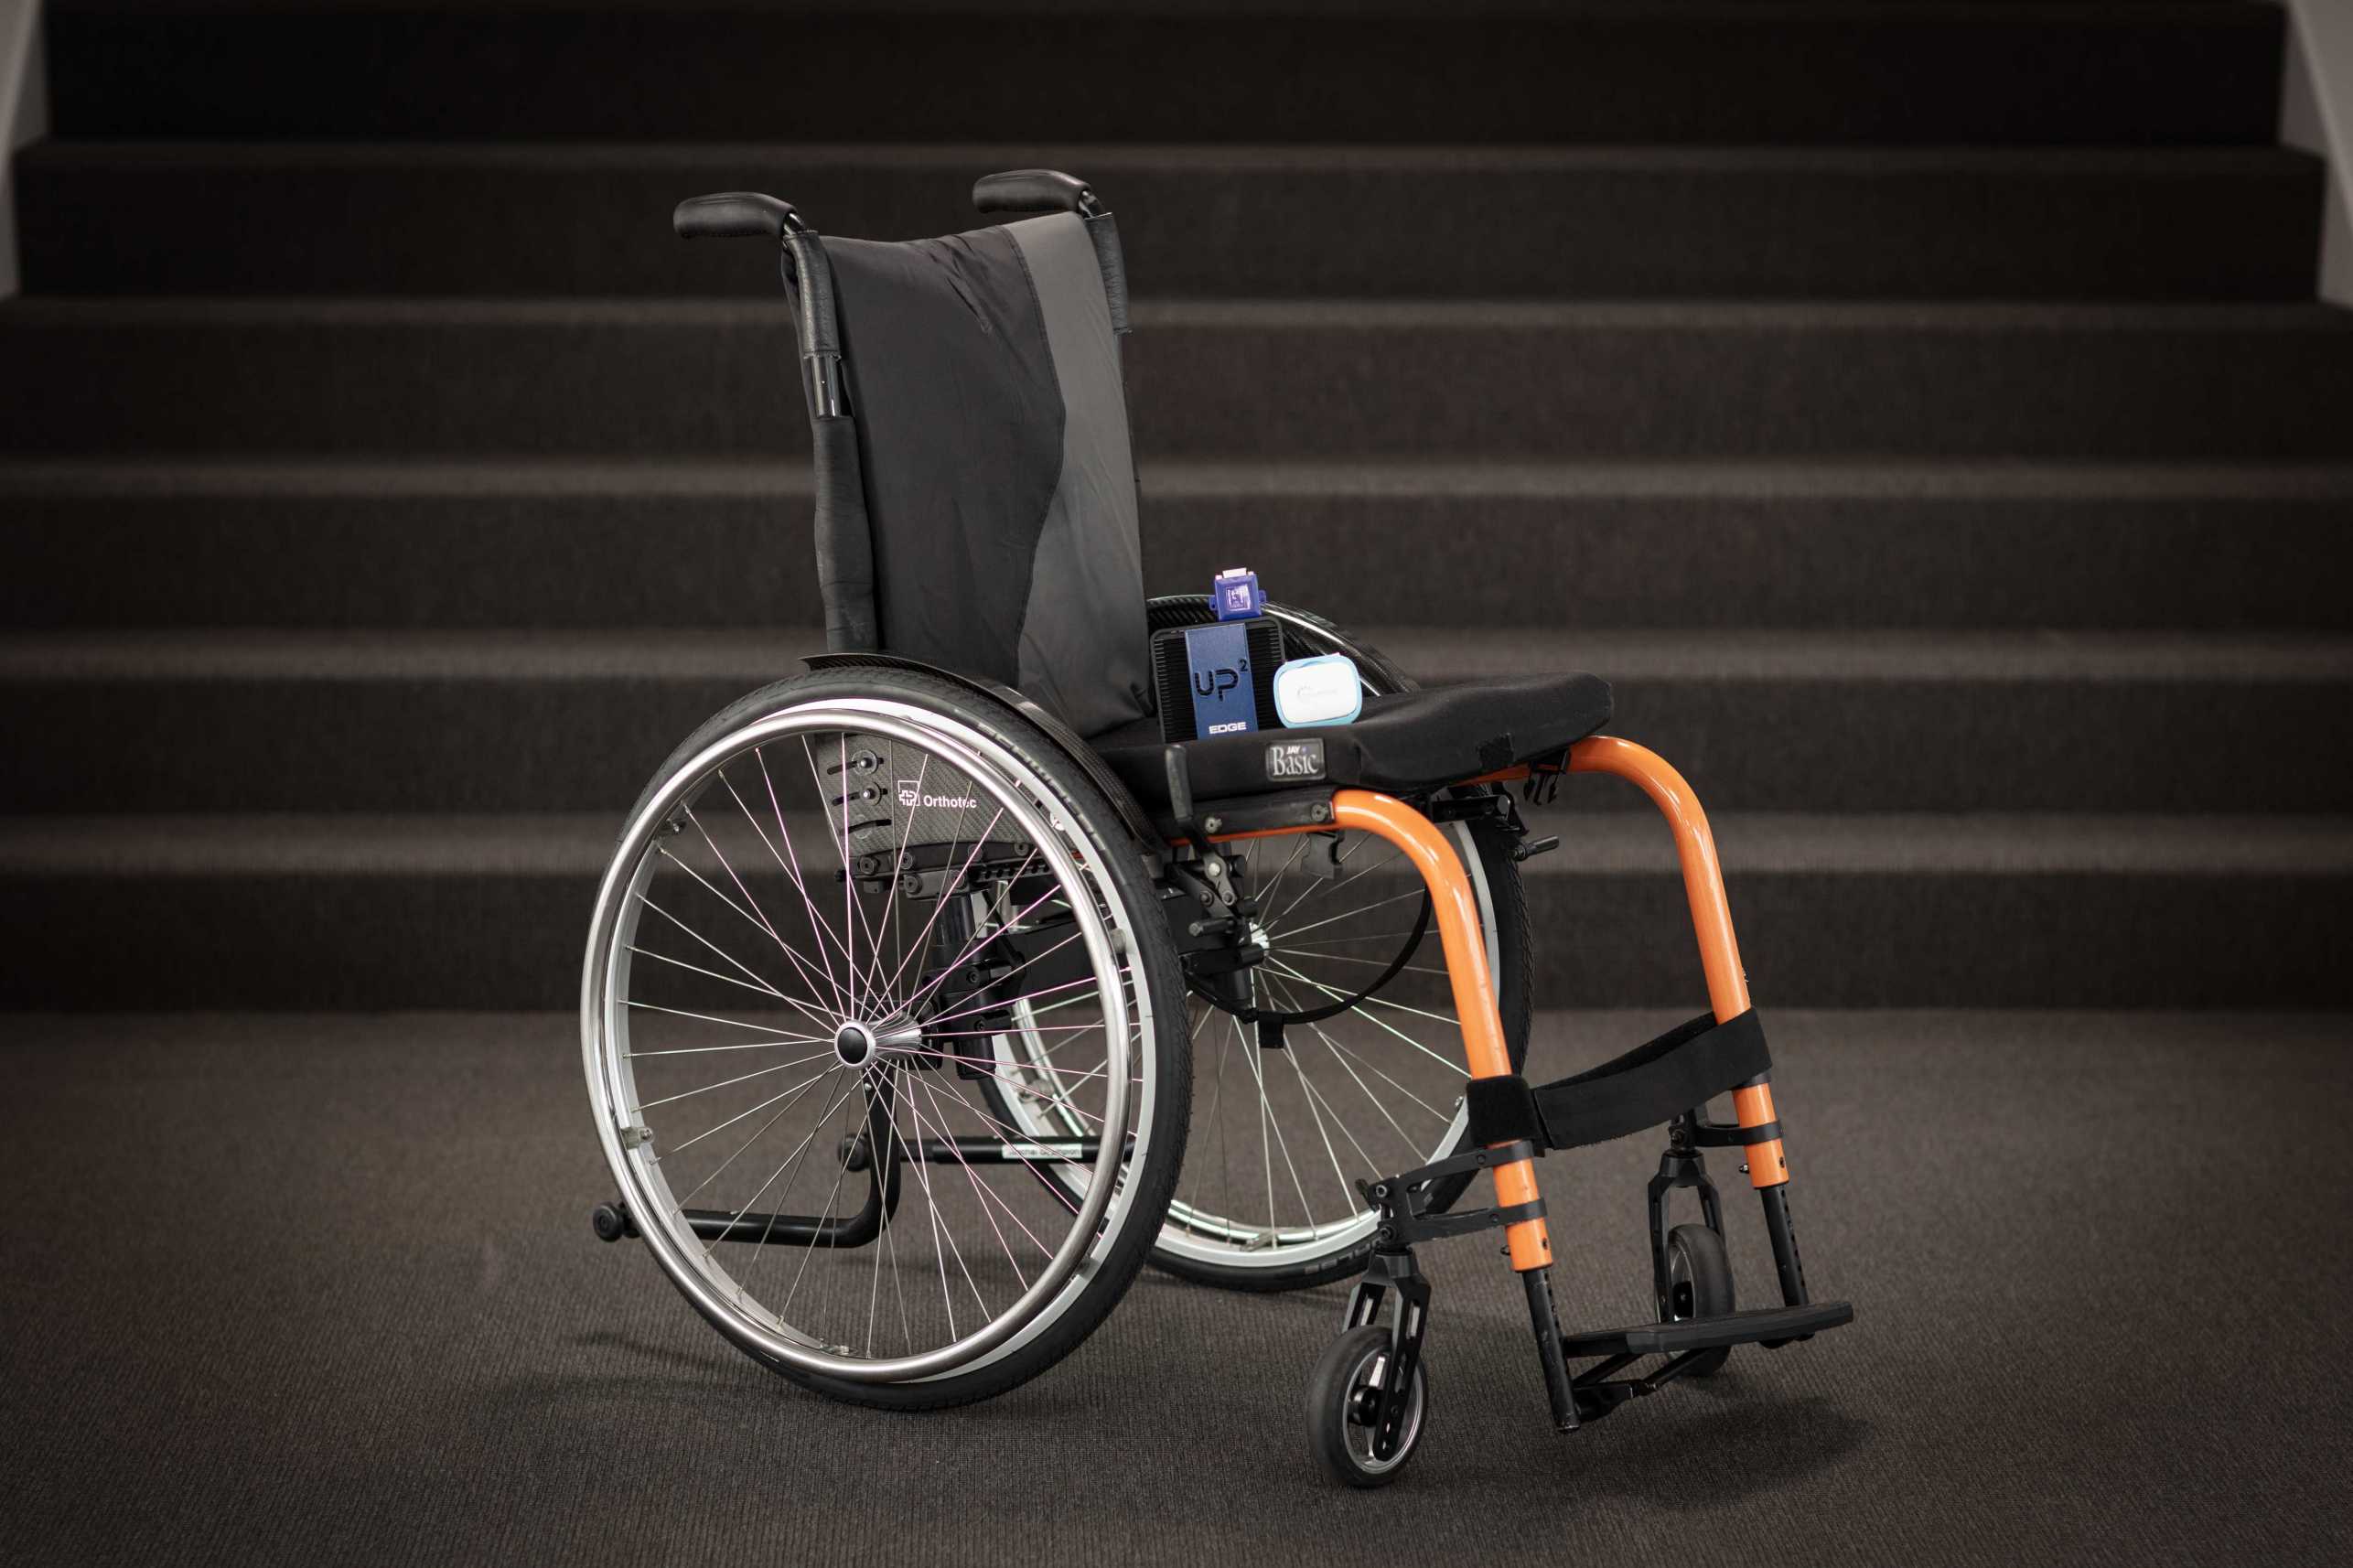 Enlarged view: A manual wheelchair with an embedded computer, a two other sensors on the seat 